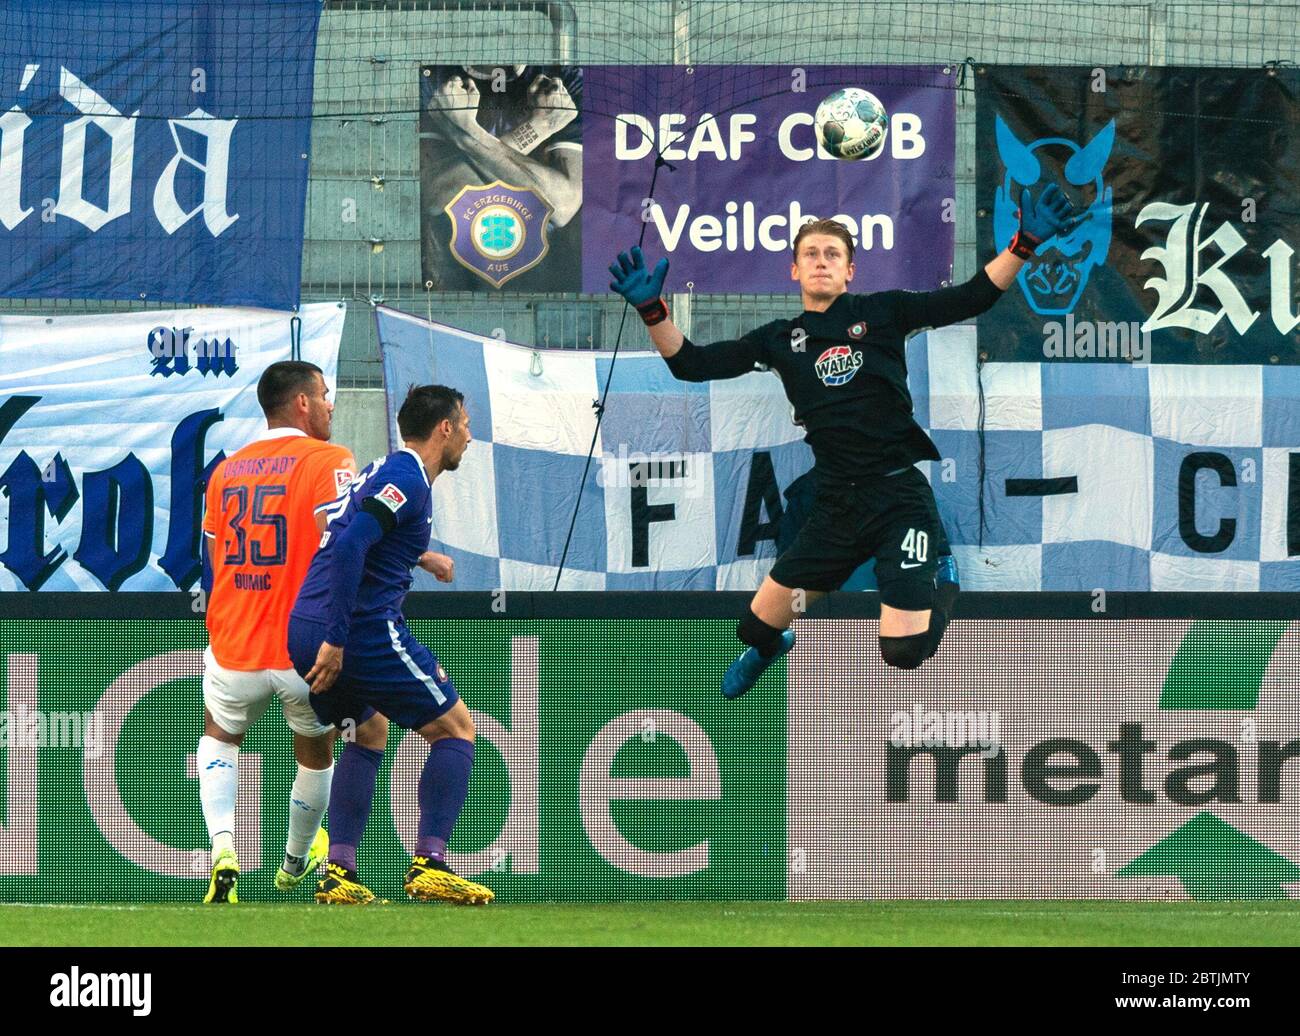 Aue, Germany. 26th May, 2020. Football: 2nd Bundesliga, FC Erzgebirge Aue - SV Darmstadt 98, 28th matchday, at the Sparkassen-Erzgebirgsstadion. Aue goalkeeper Robert Jendrusch (r) in action. Credit: Robert Michael/dpa - Pool /dpa - IMPORTANT NOTE: In accordance with the regulations of the DFL Deutsche Fußball Liga and the DFB Deutscher Fußball-Bund, it is prohibited to exploit or have exploited in the stadium and/or from the game taken photographs in the form of sequence images and/or video-like photo series./dpa/Alamy Live News Stock Photo